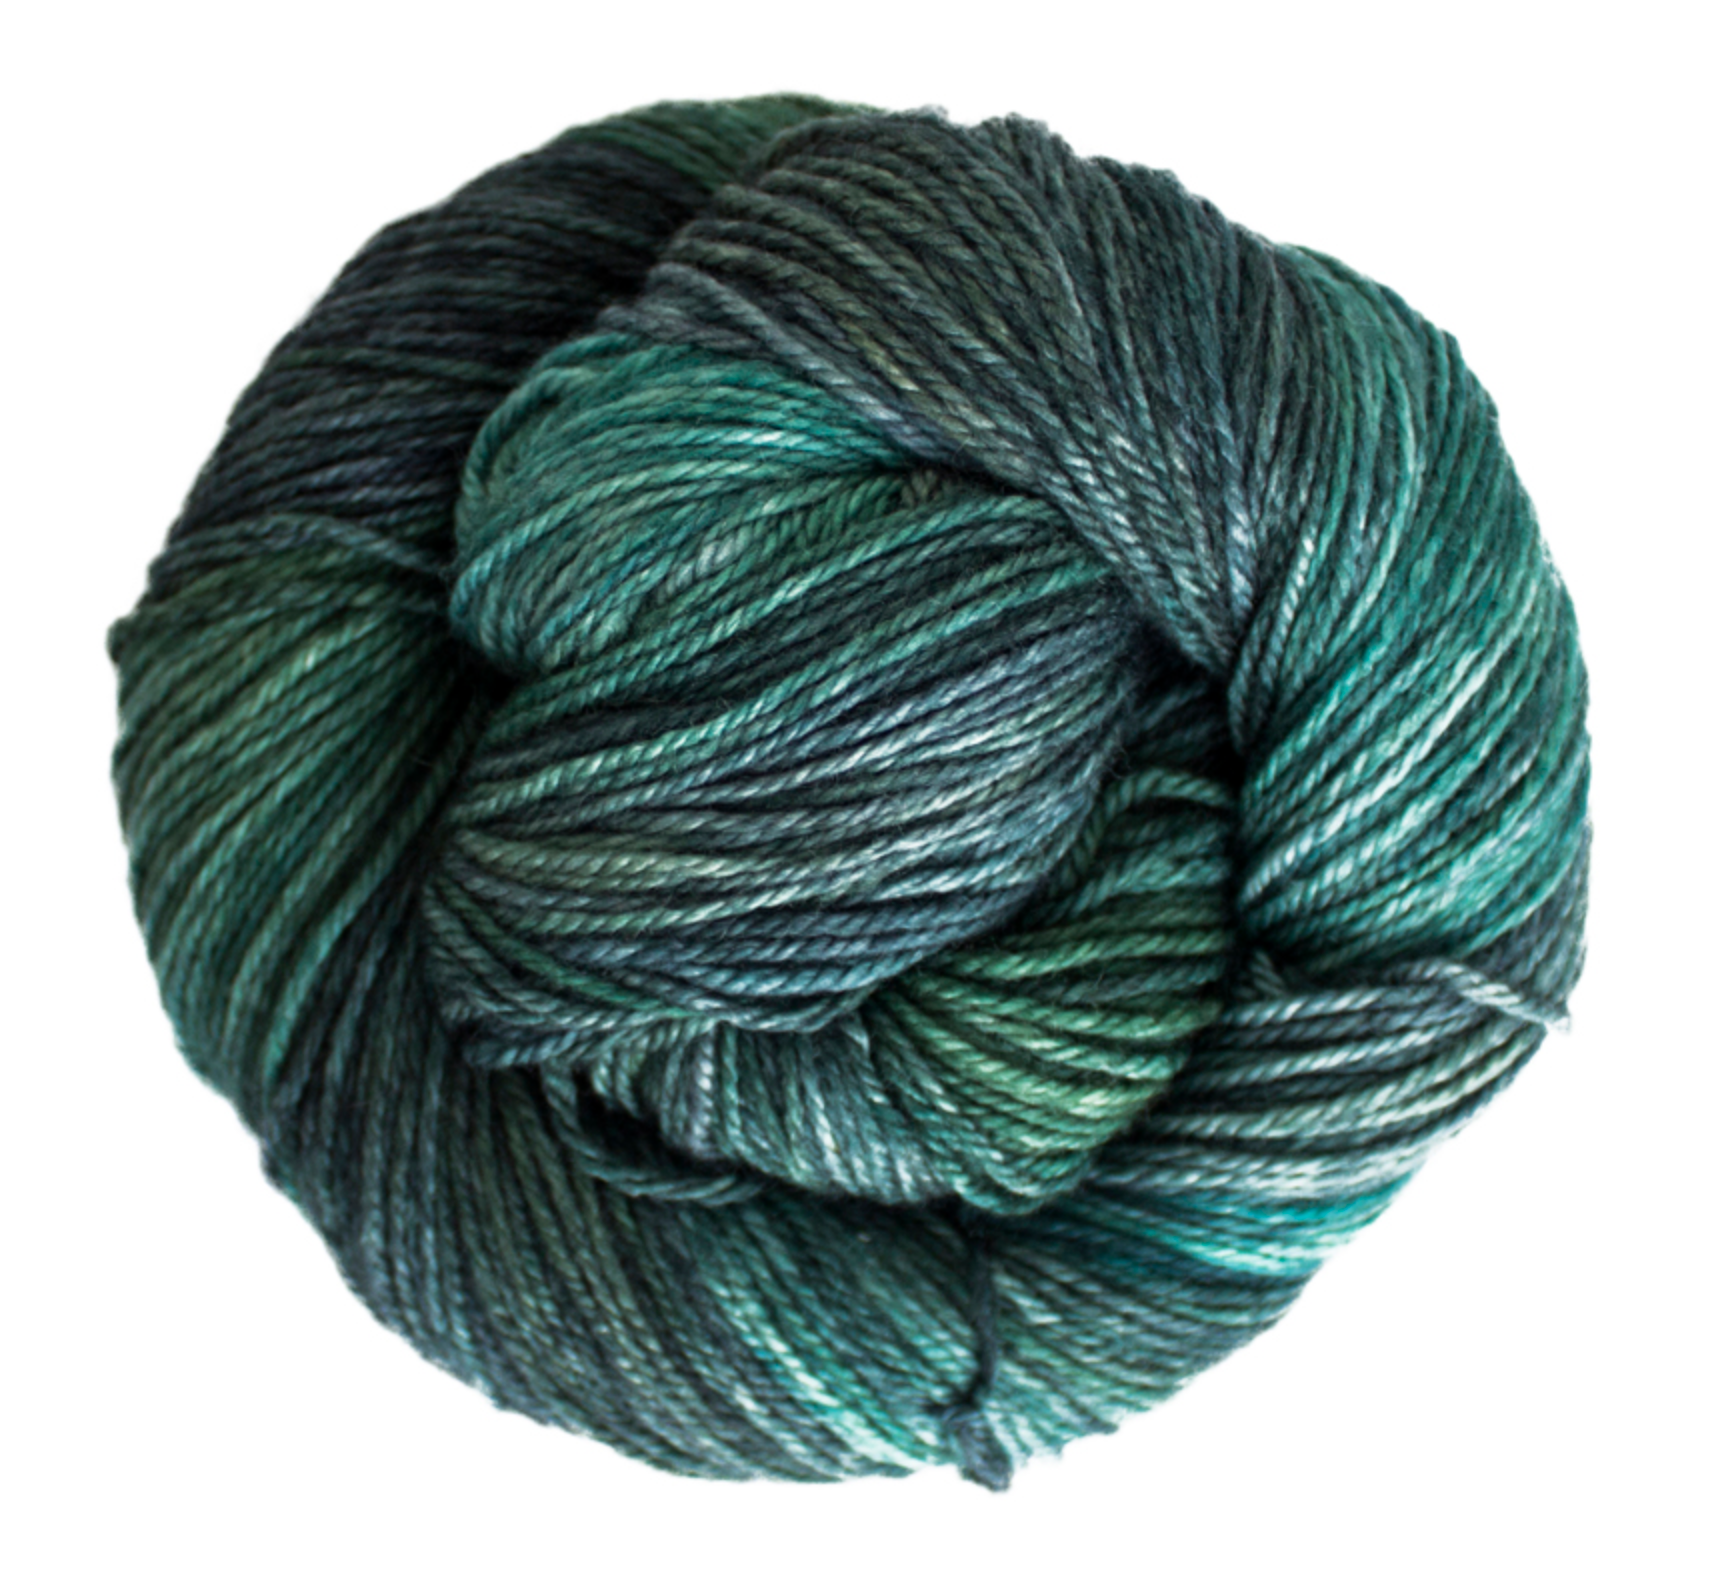 Baby Bee Sweet Delight Light Worsted Yarn in Teal, Too 